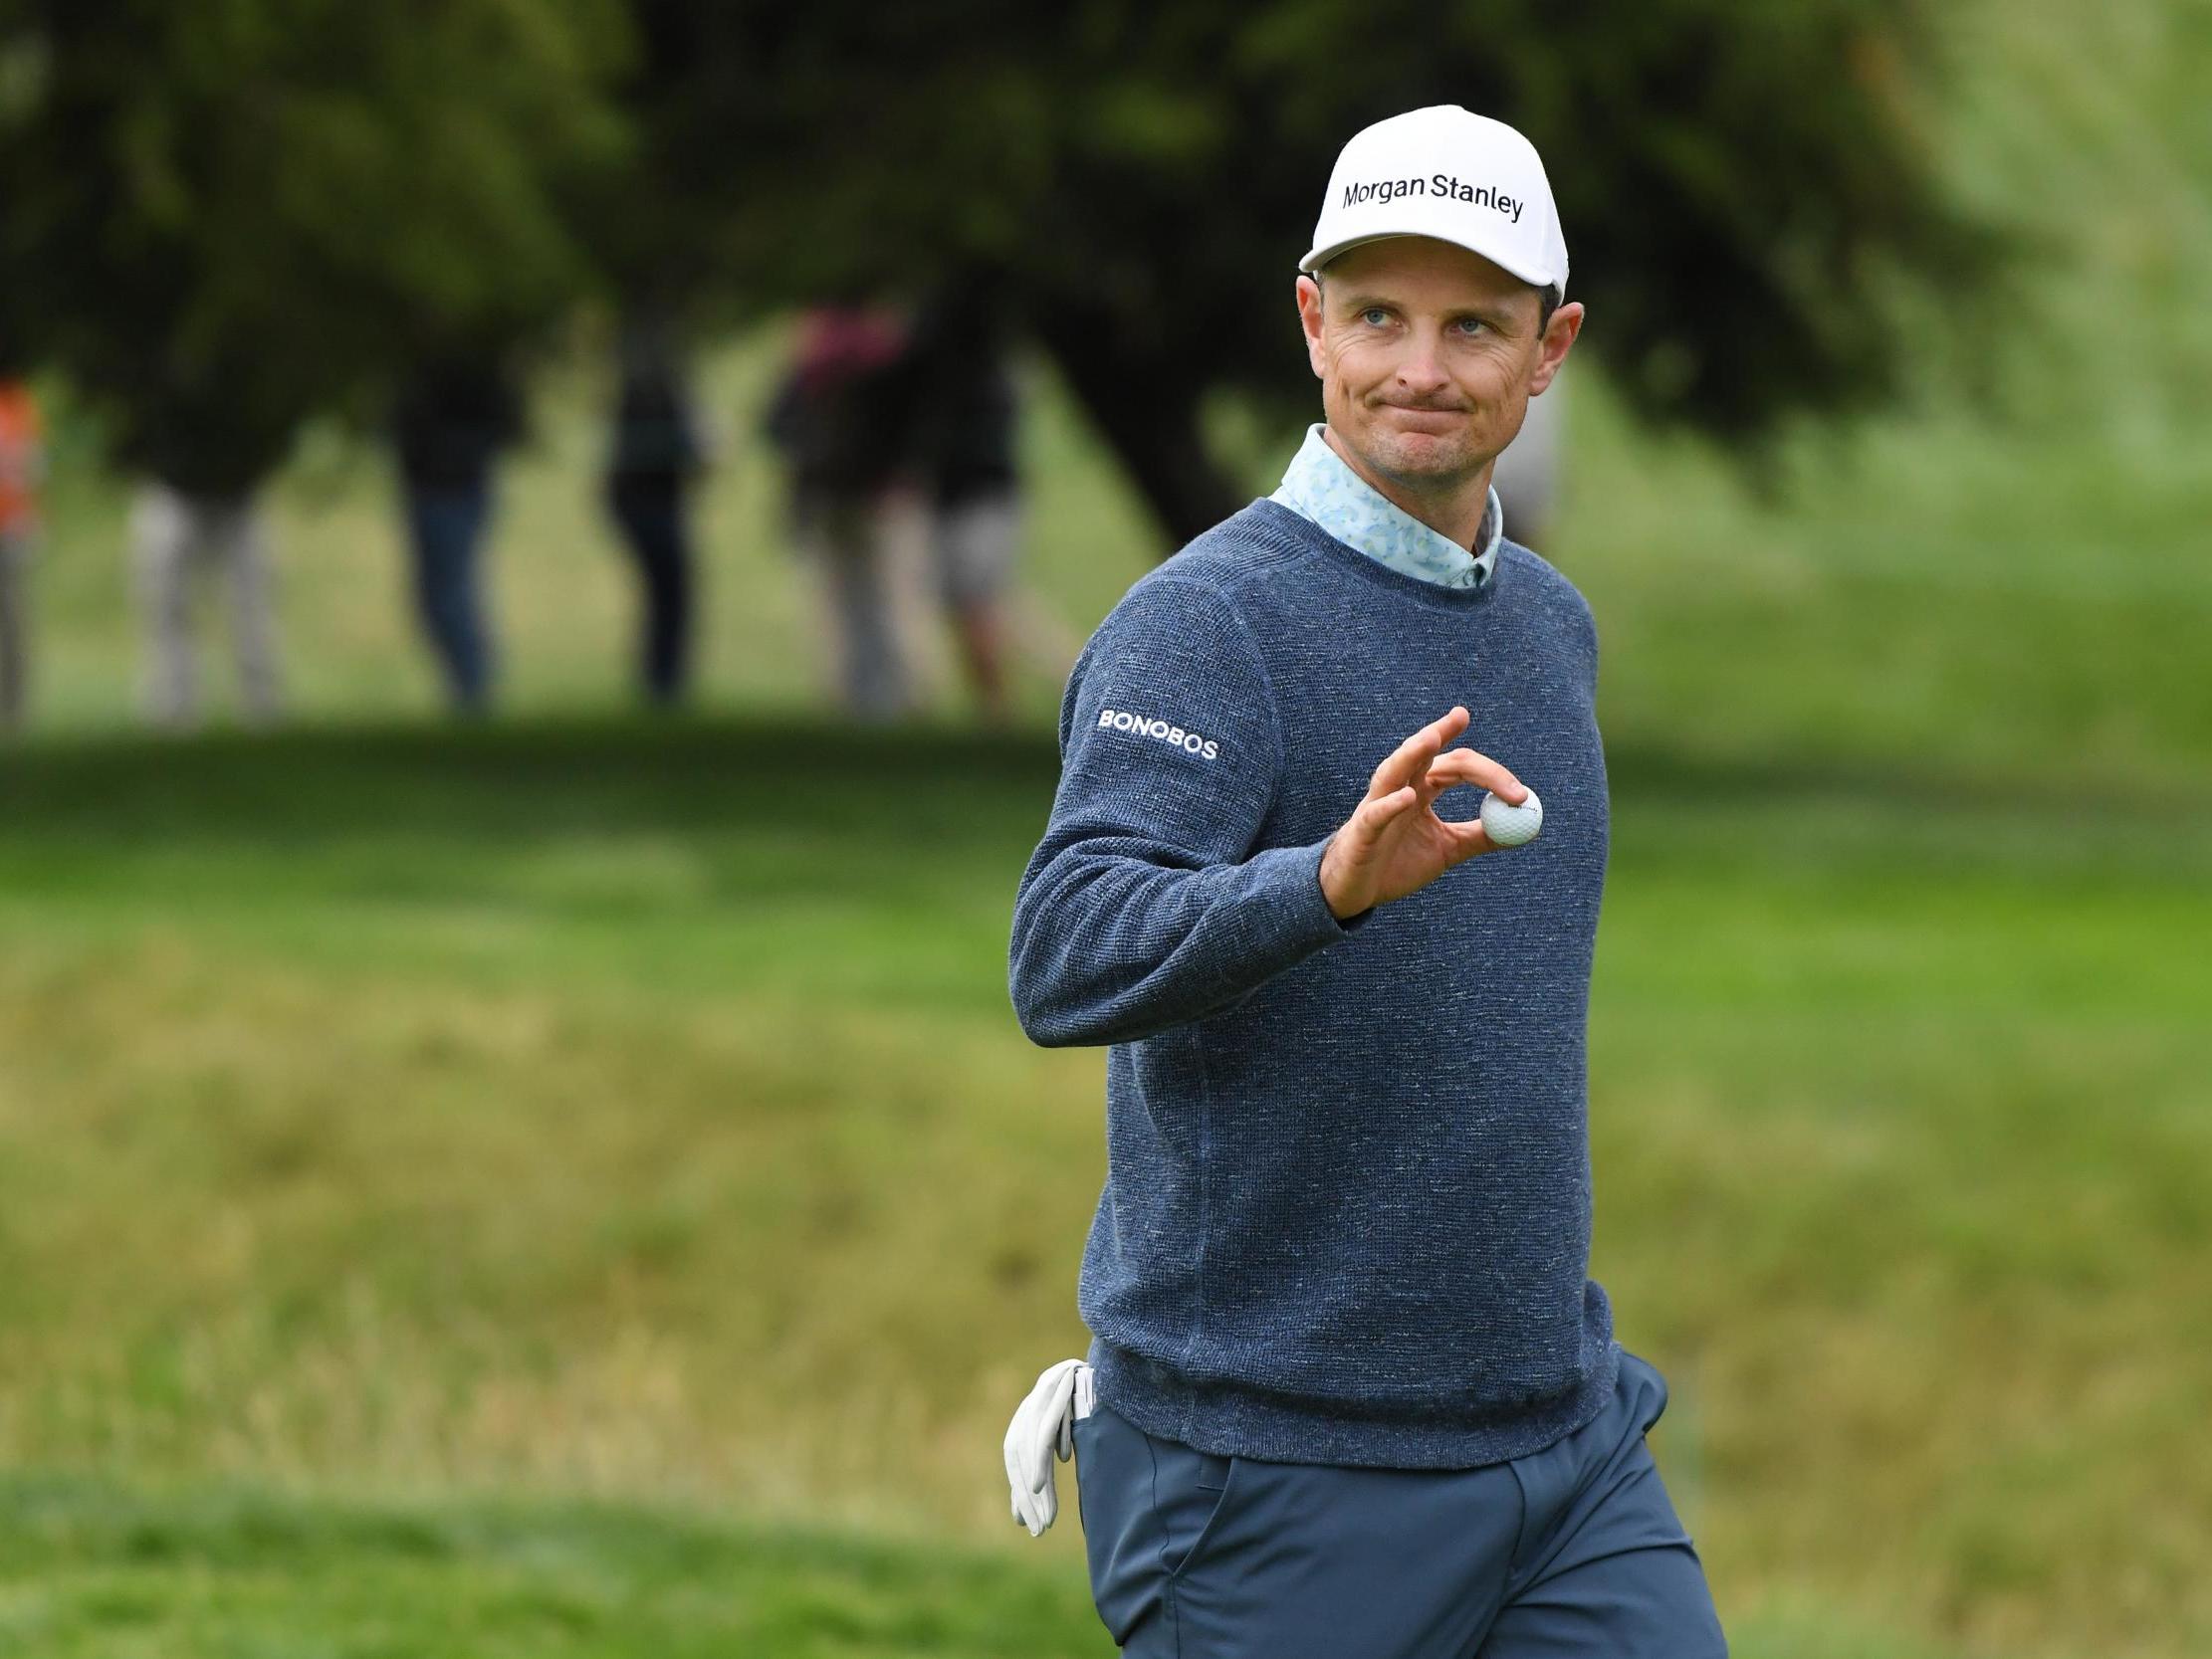 Justin Rose acknowledges the crowds after a putt during the third round